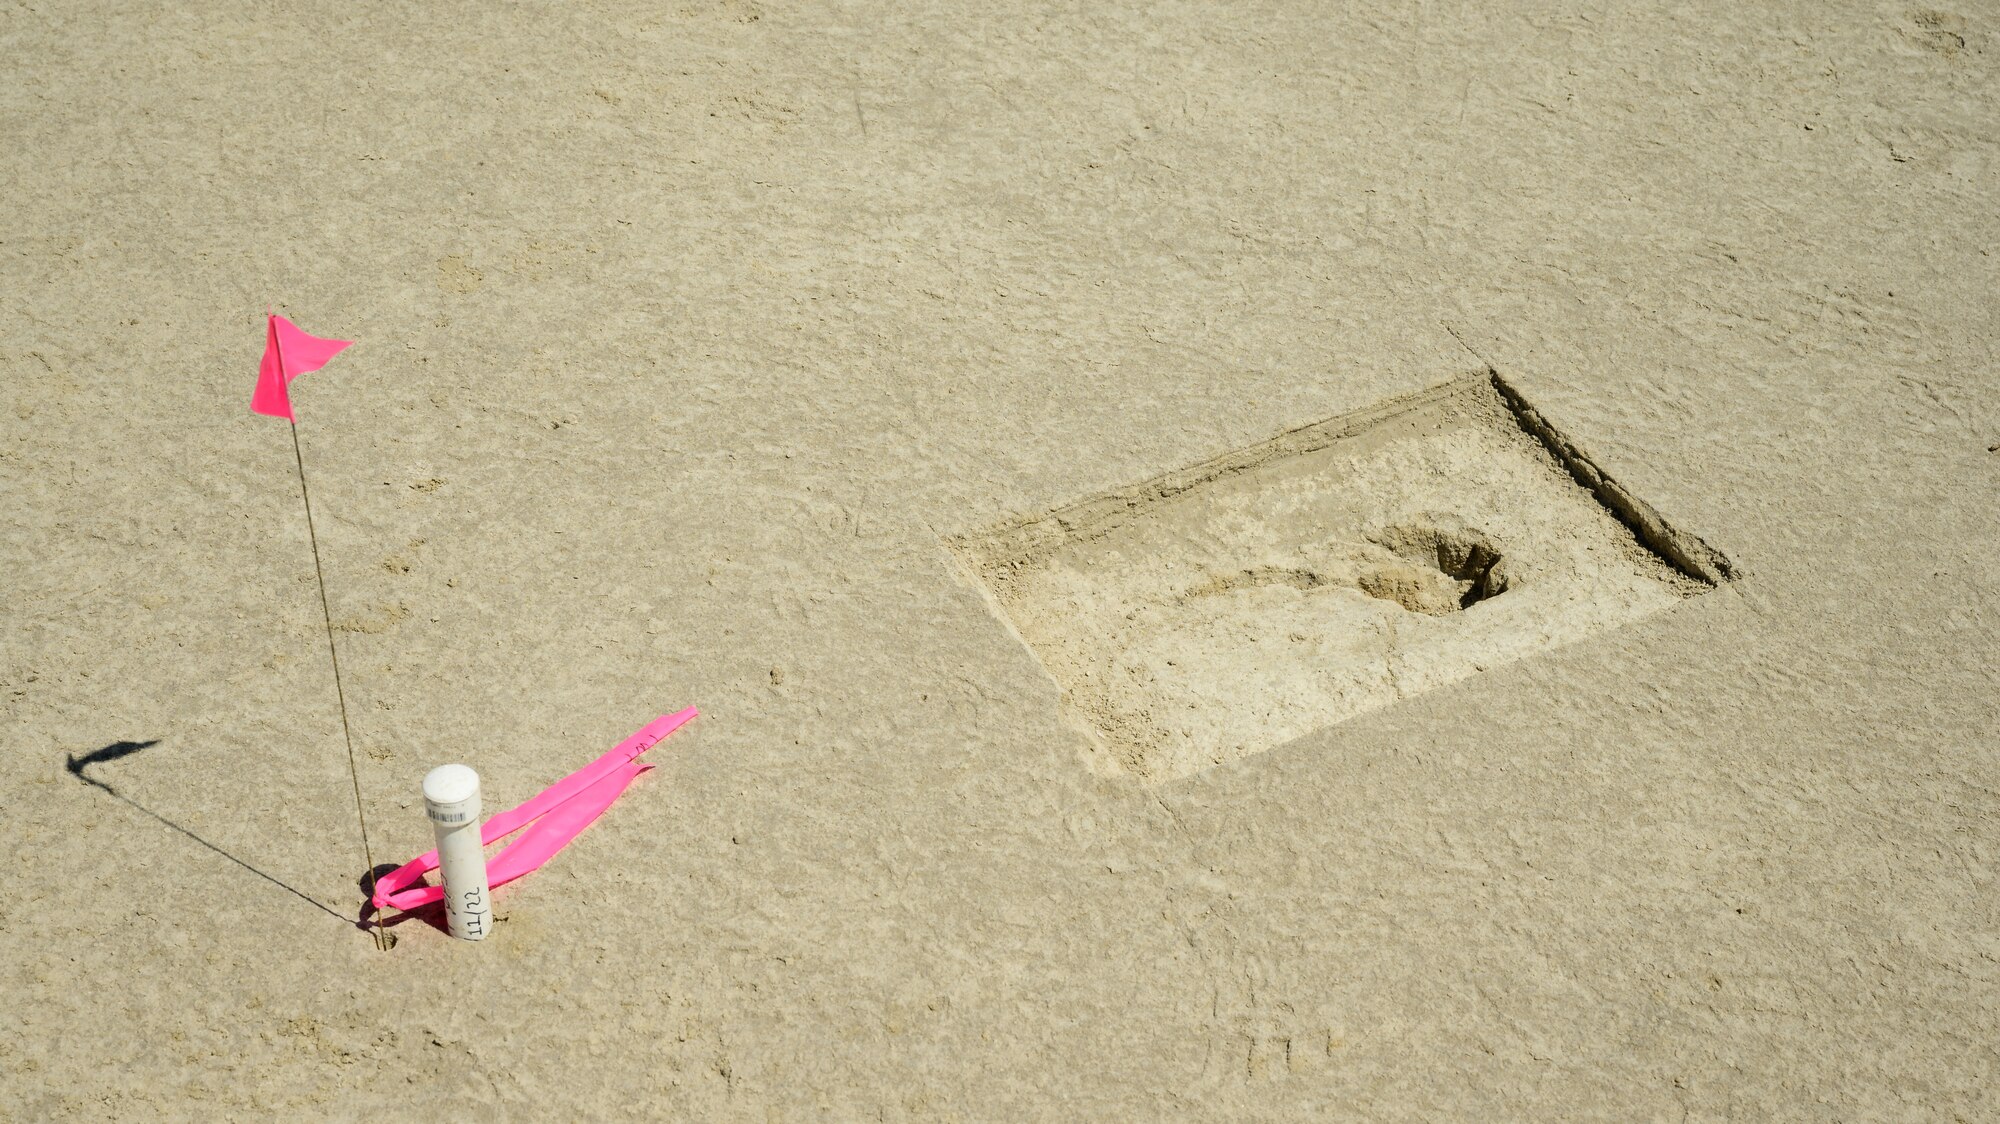 A footprint appears on an archaeological site marked with a pink pin flag.